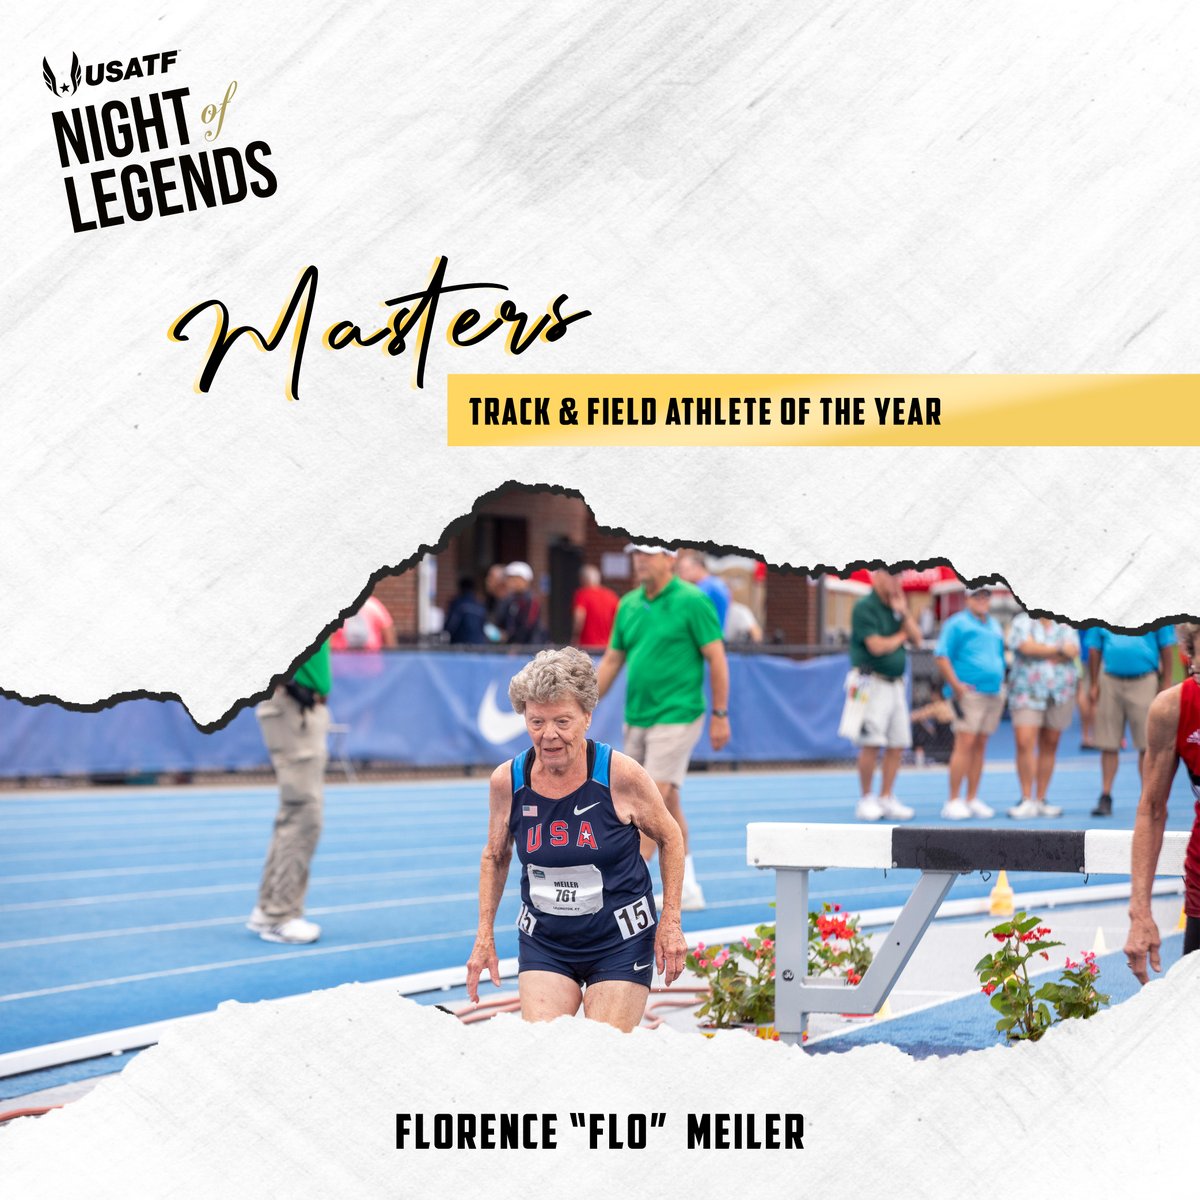 Masters of their craft 🏆 Congratulations to Jenny Hitchings (LDR) and Florence “Flo” Meiler (Track & Field), who were awarded the 2022 Masters Athletes of the Year at the USATF Night of Legends.